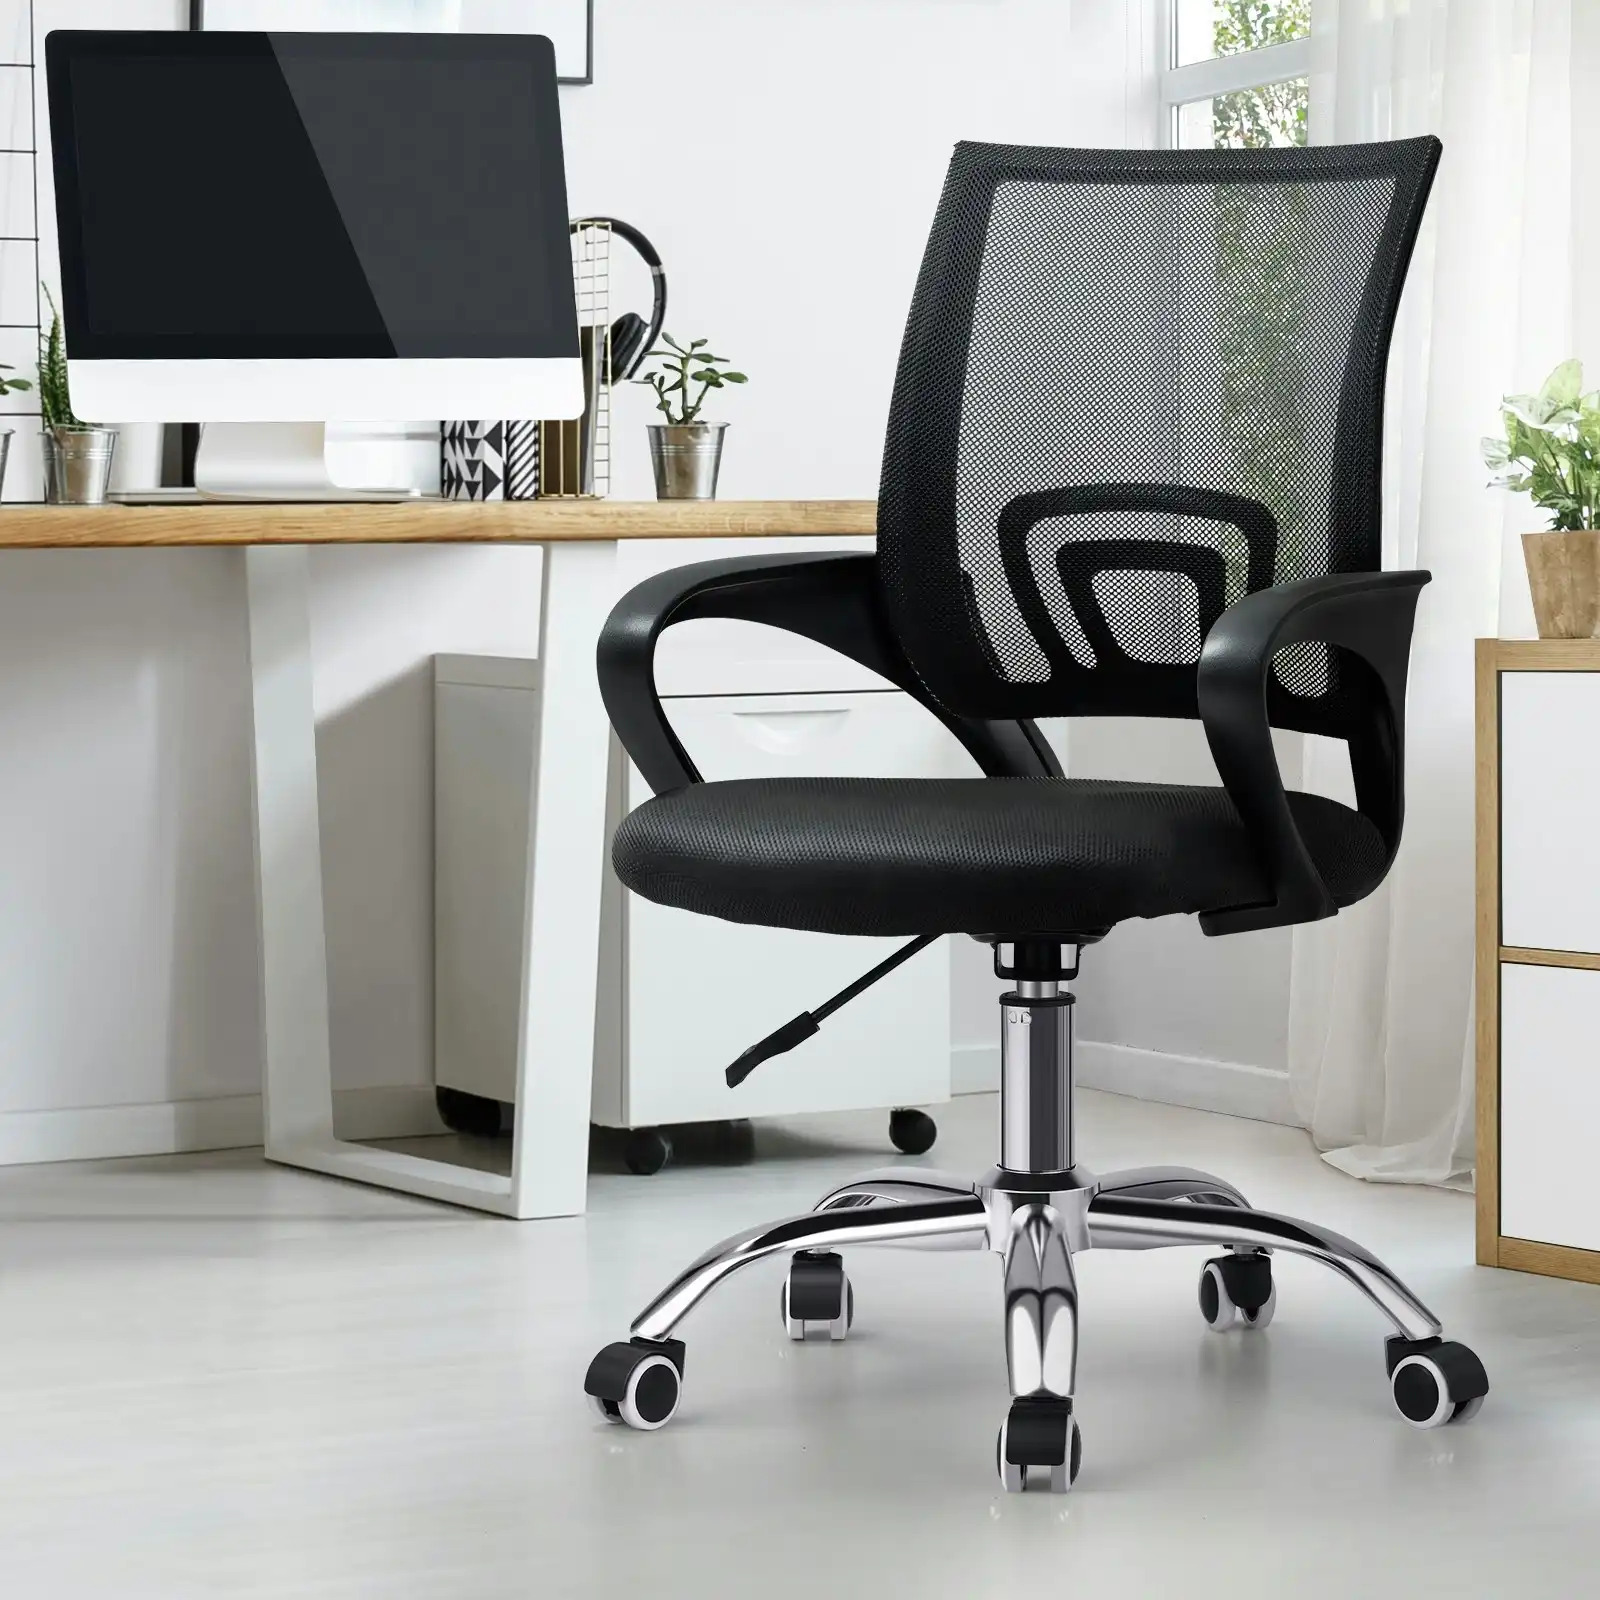 Oikiture Office Gaming Chair Computer Mesh Chairs Executive Foam Seat Black